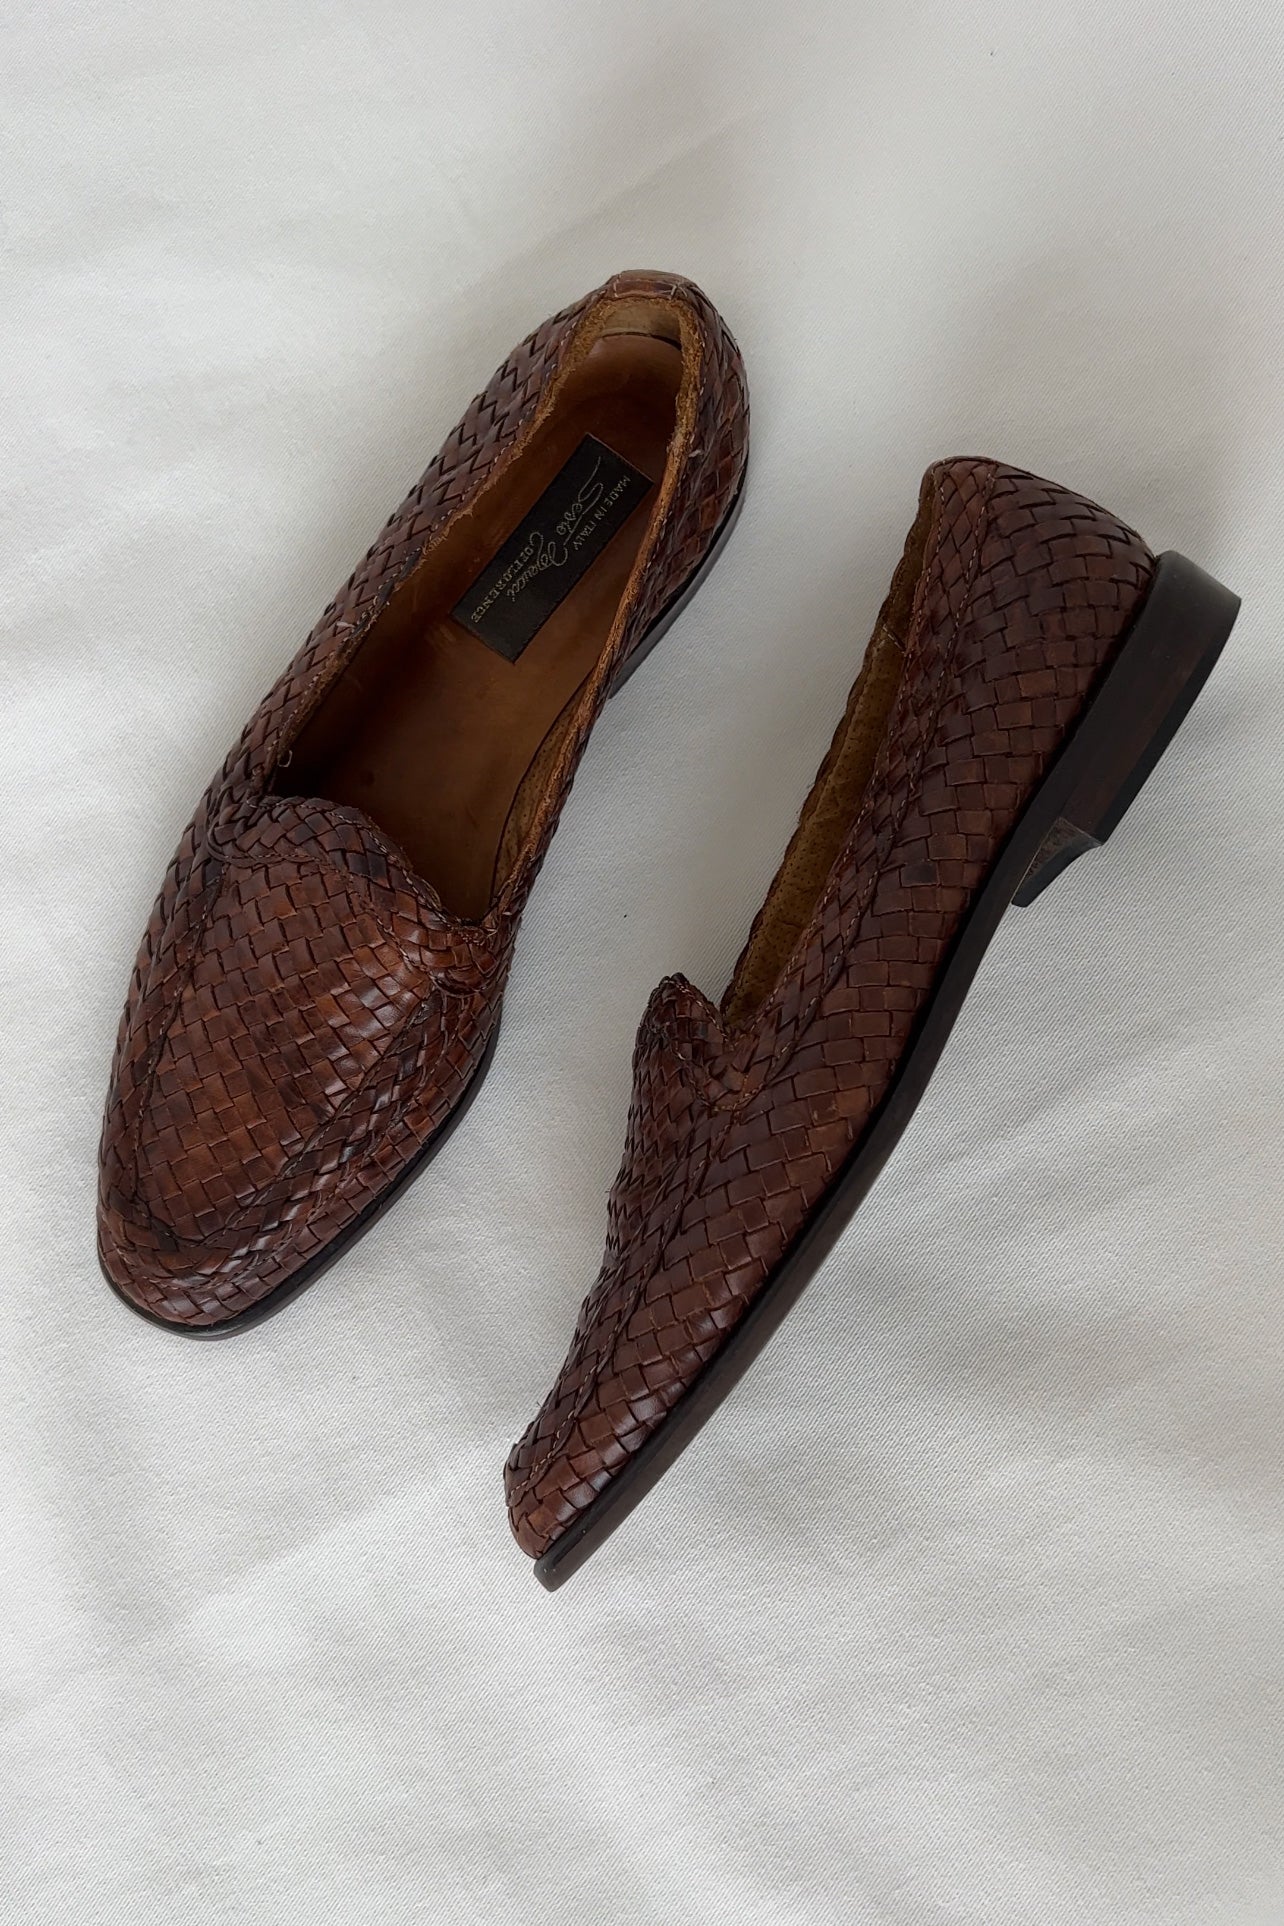 Vintage Italian Pécan Woven Leather Loafers, 8N